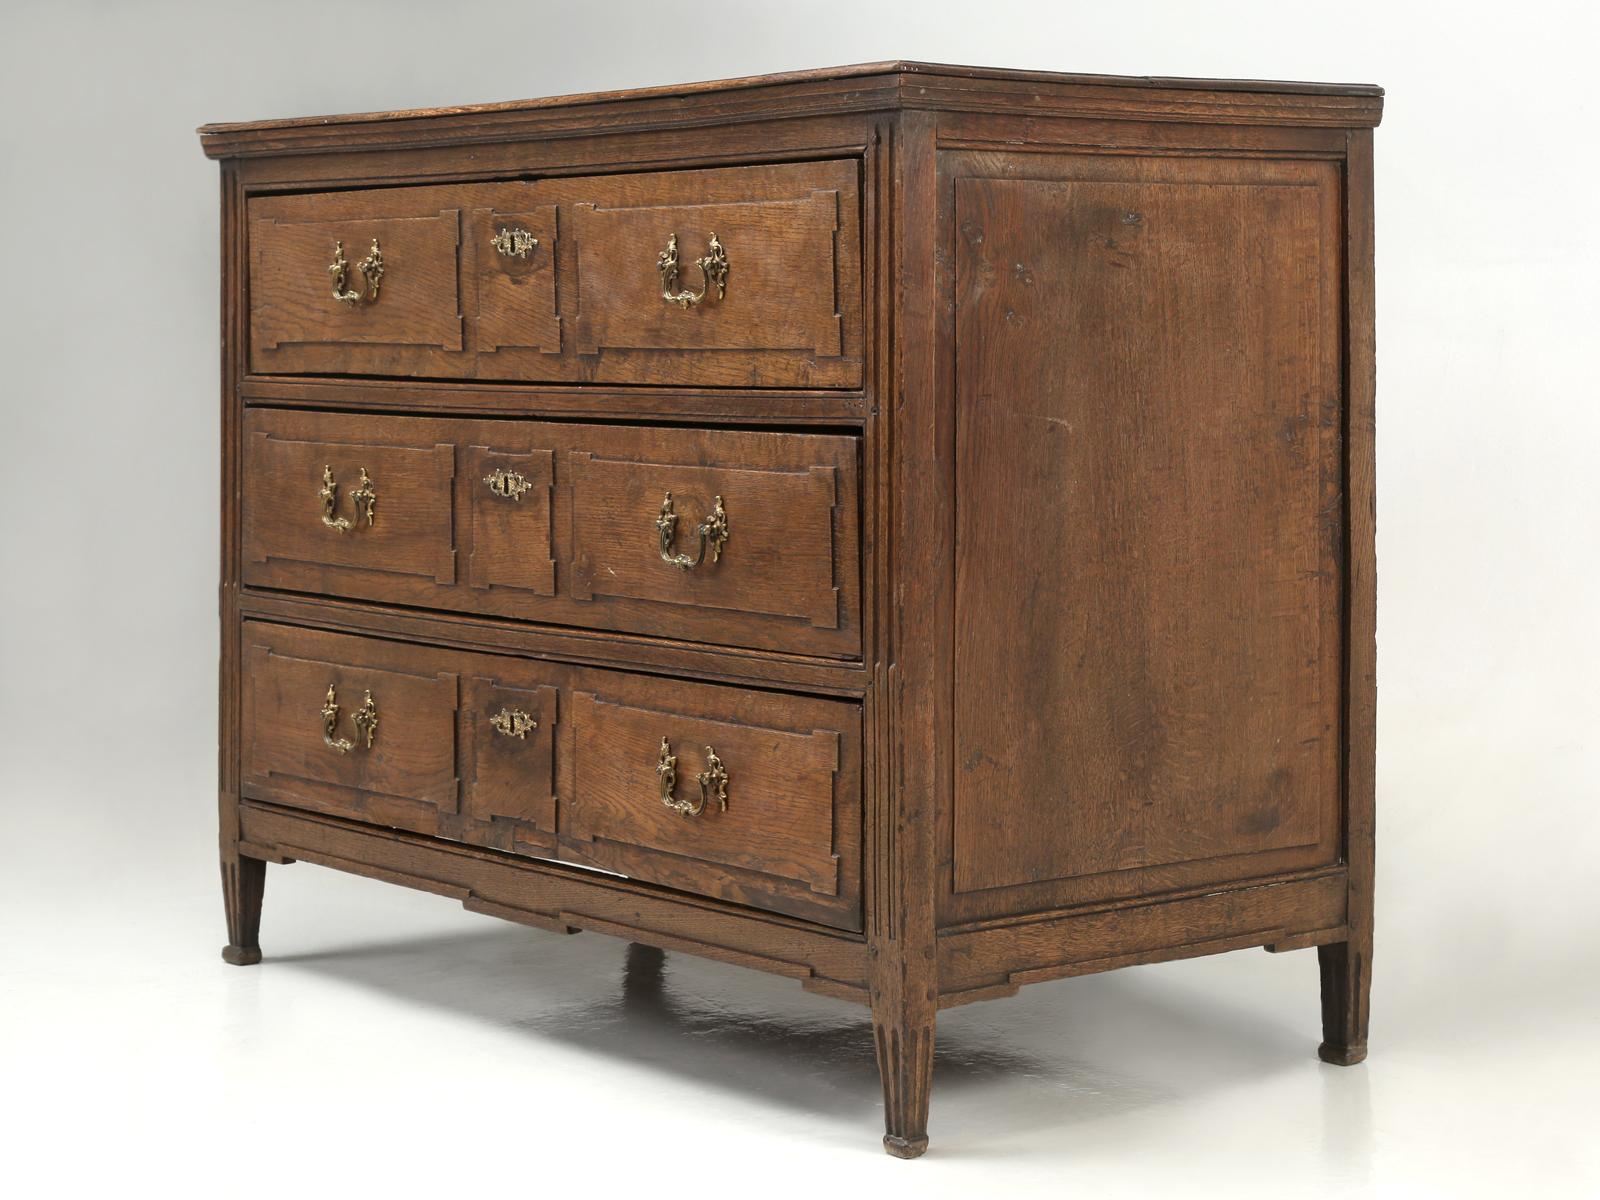 Antique French commode, chest of drawers or dresser and I suppose it all depends upon where you are from, as to what you would like to call our antique French commode. We would date this from the early 1800s, based on the style of dovetails and the